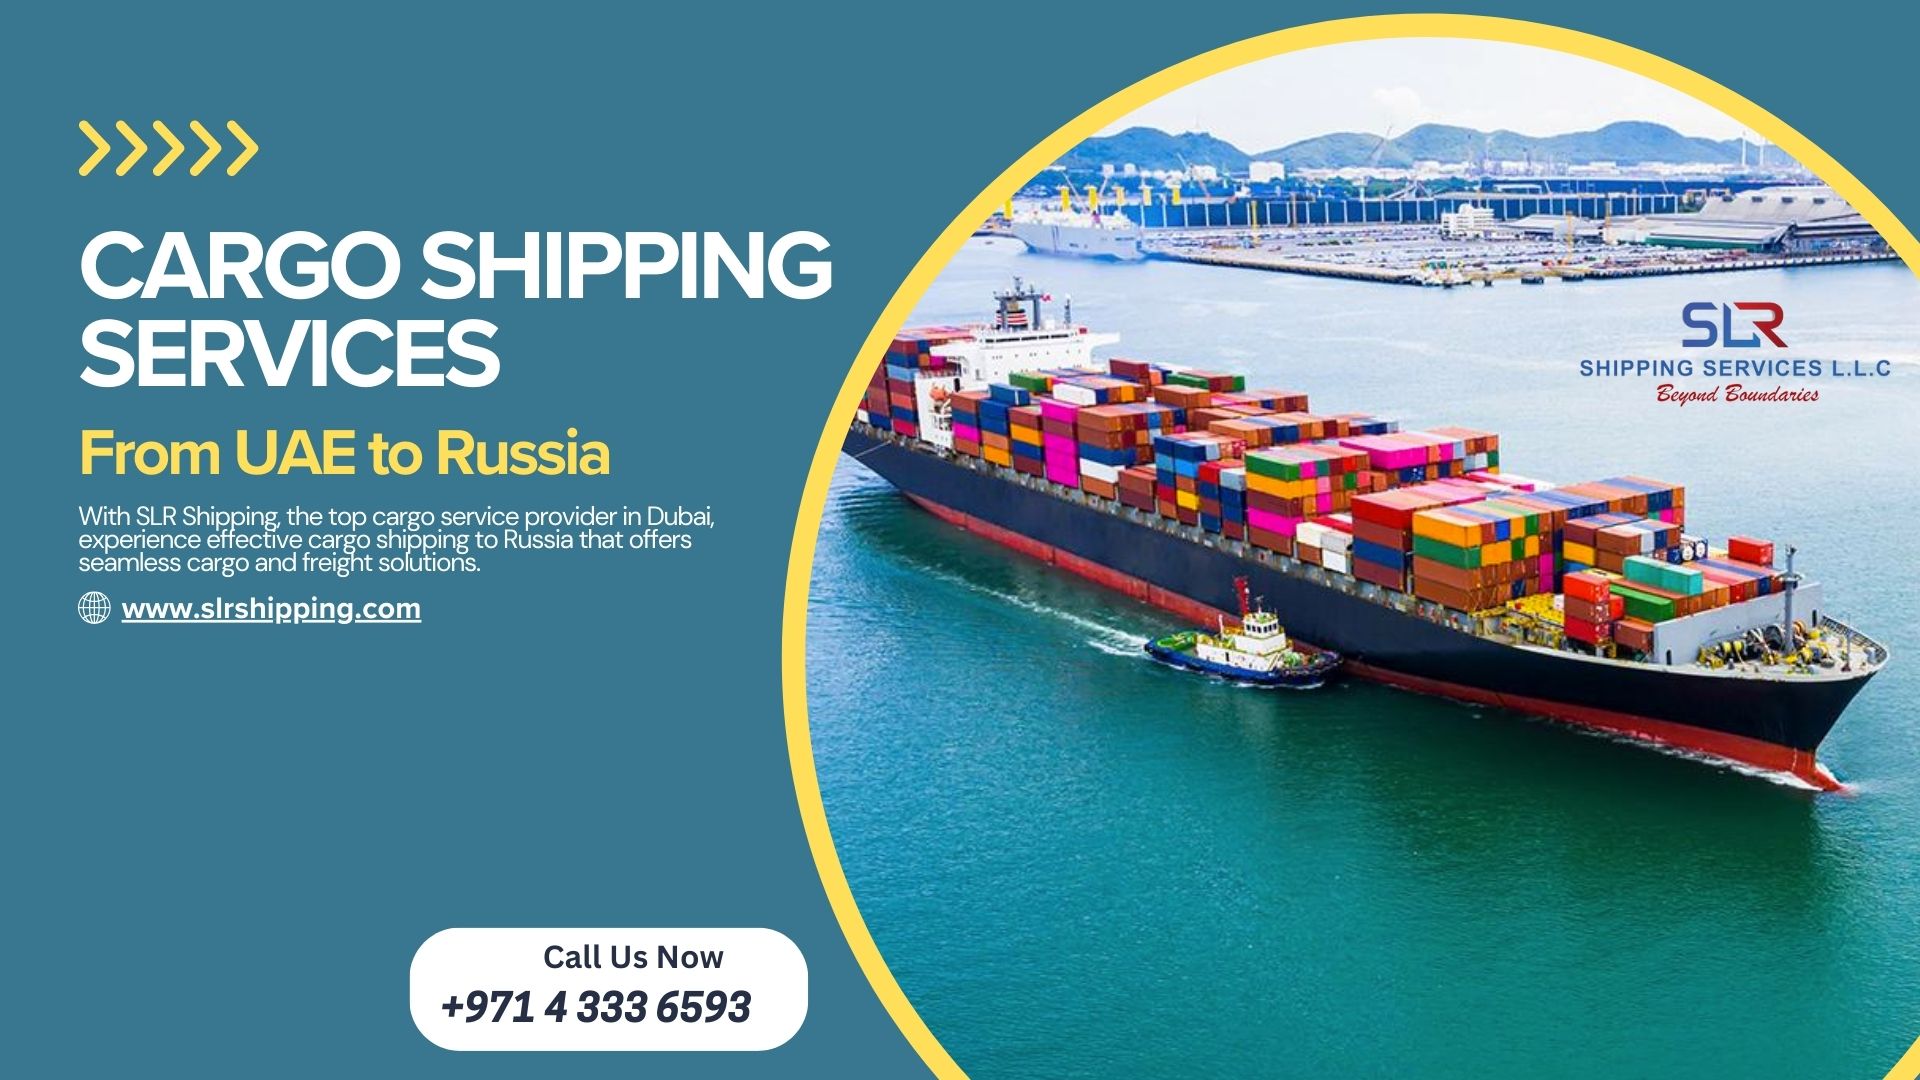 Cargo Shipping Services in Russia